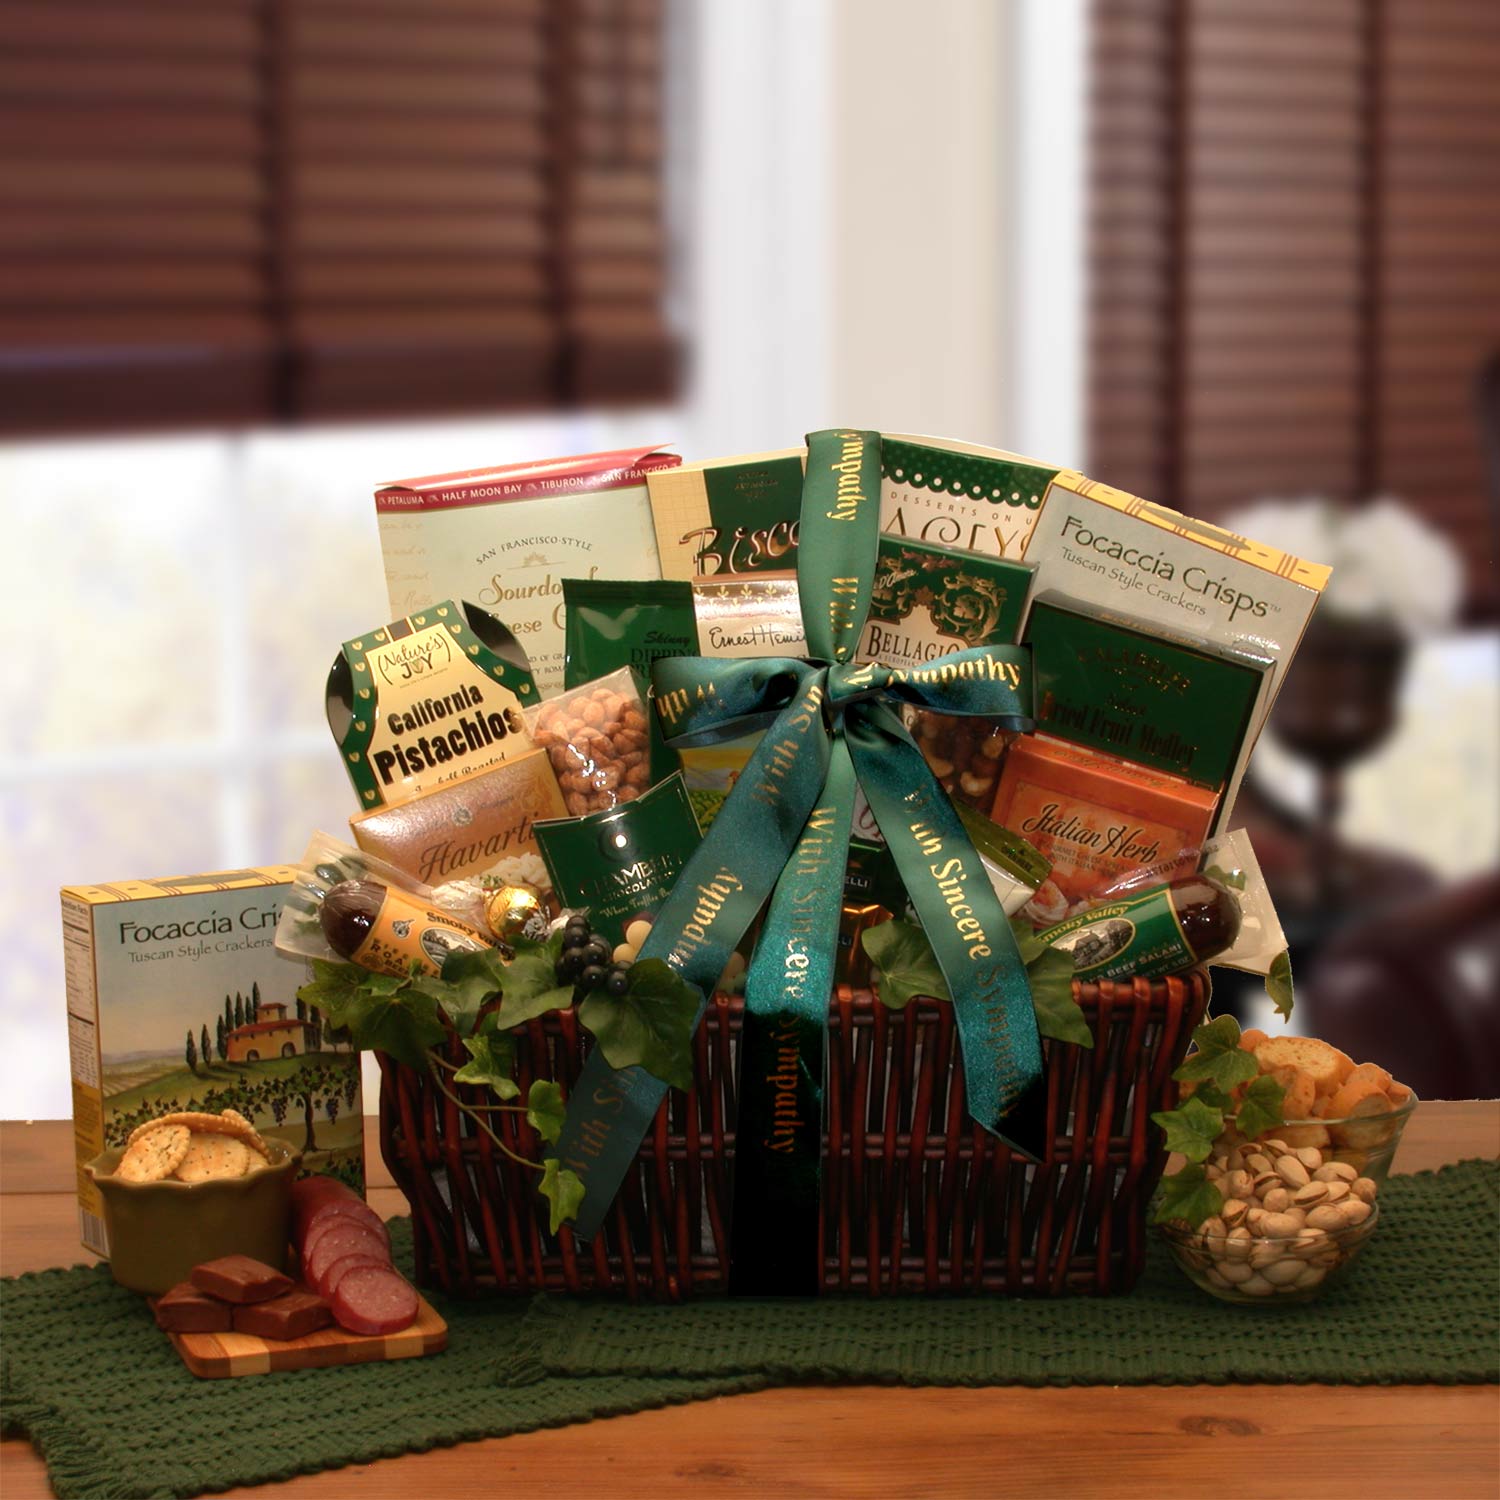 With Our Sincerest Sympathy Gift Basket - sympathy gift baskets - sympathy baskets - condolences gift basket for loss